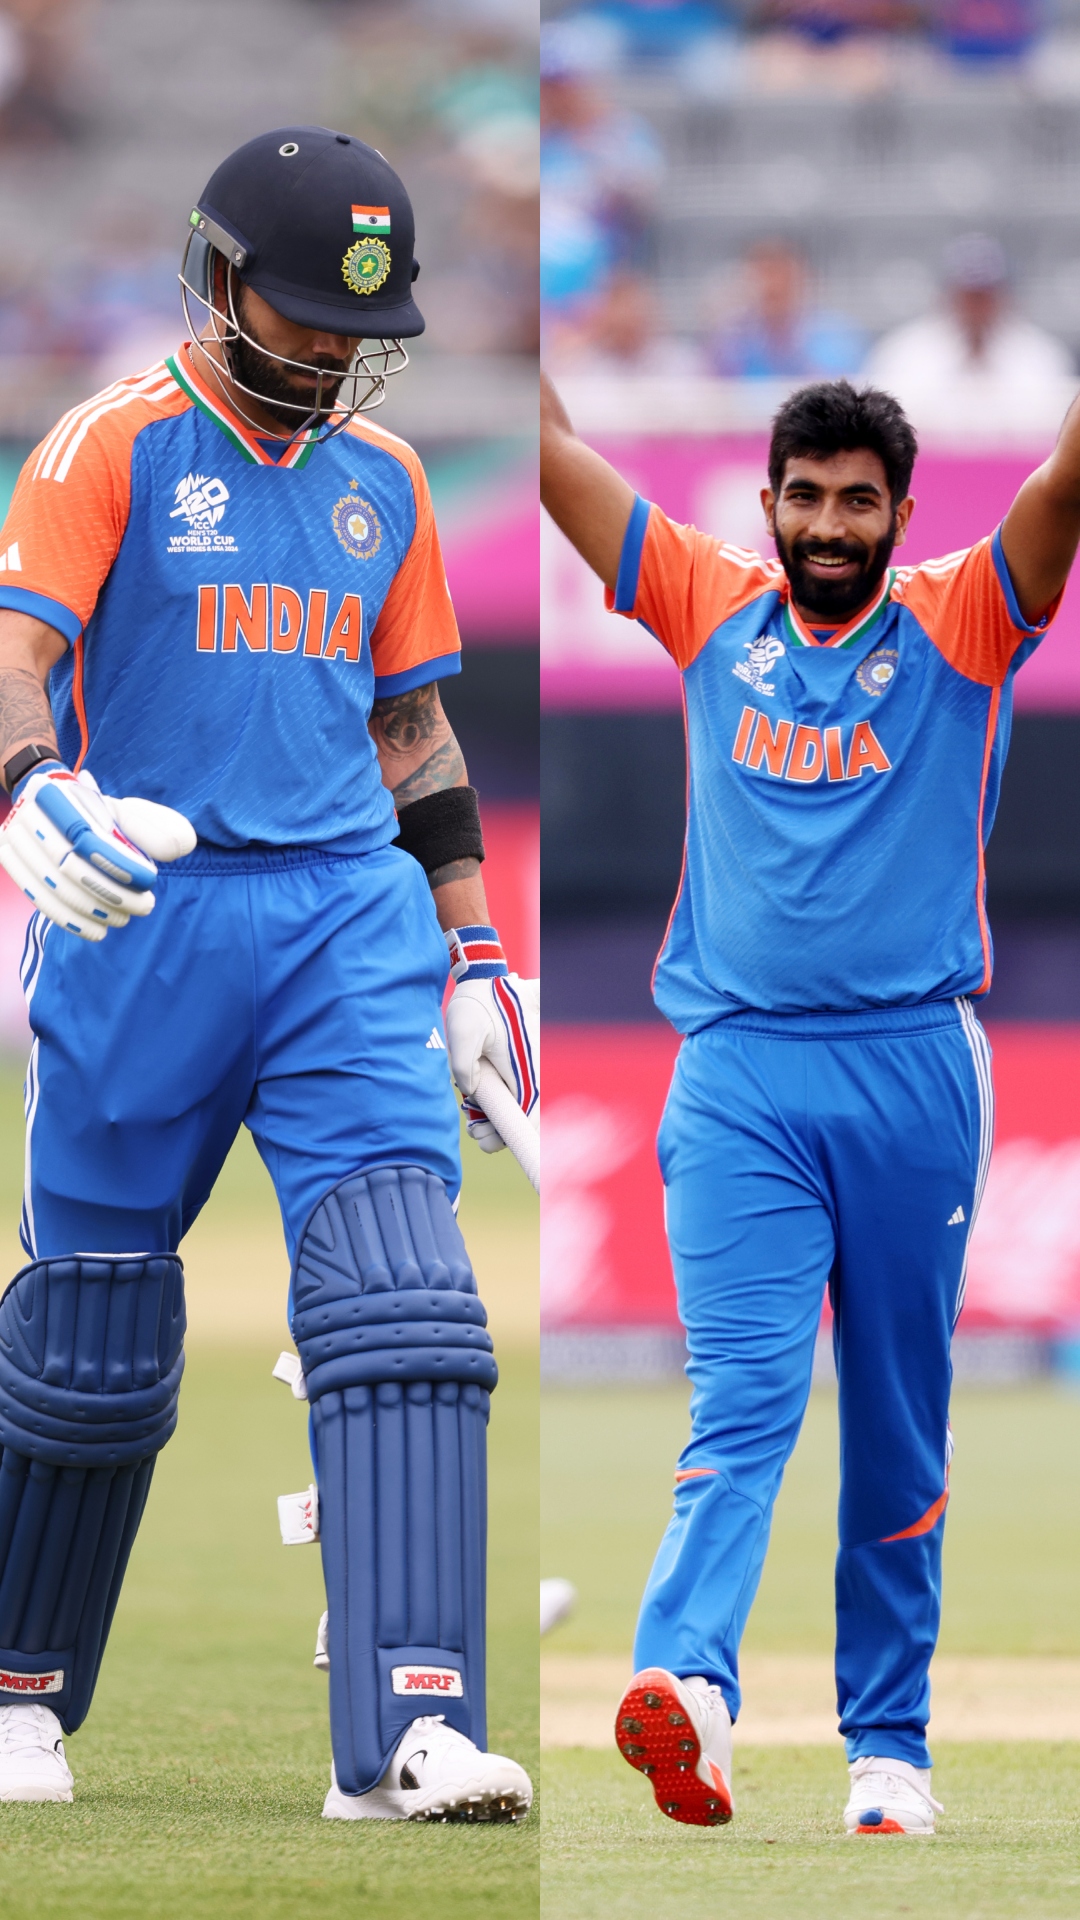 Virat Kohli 0, Bumrah 10/10; rating all Indian players in T20 World Cup group stage